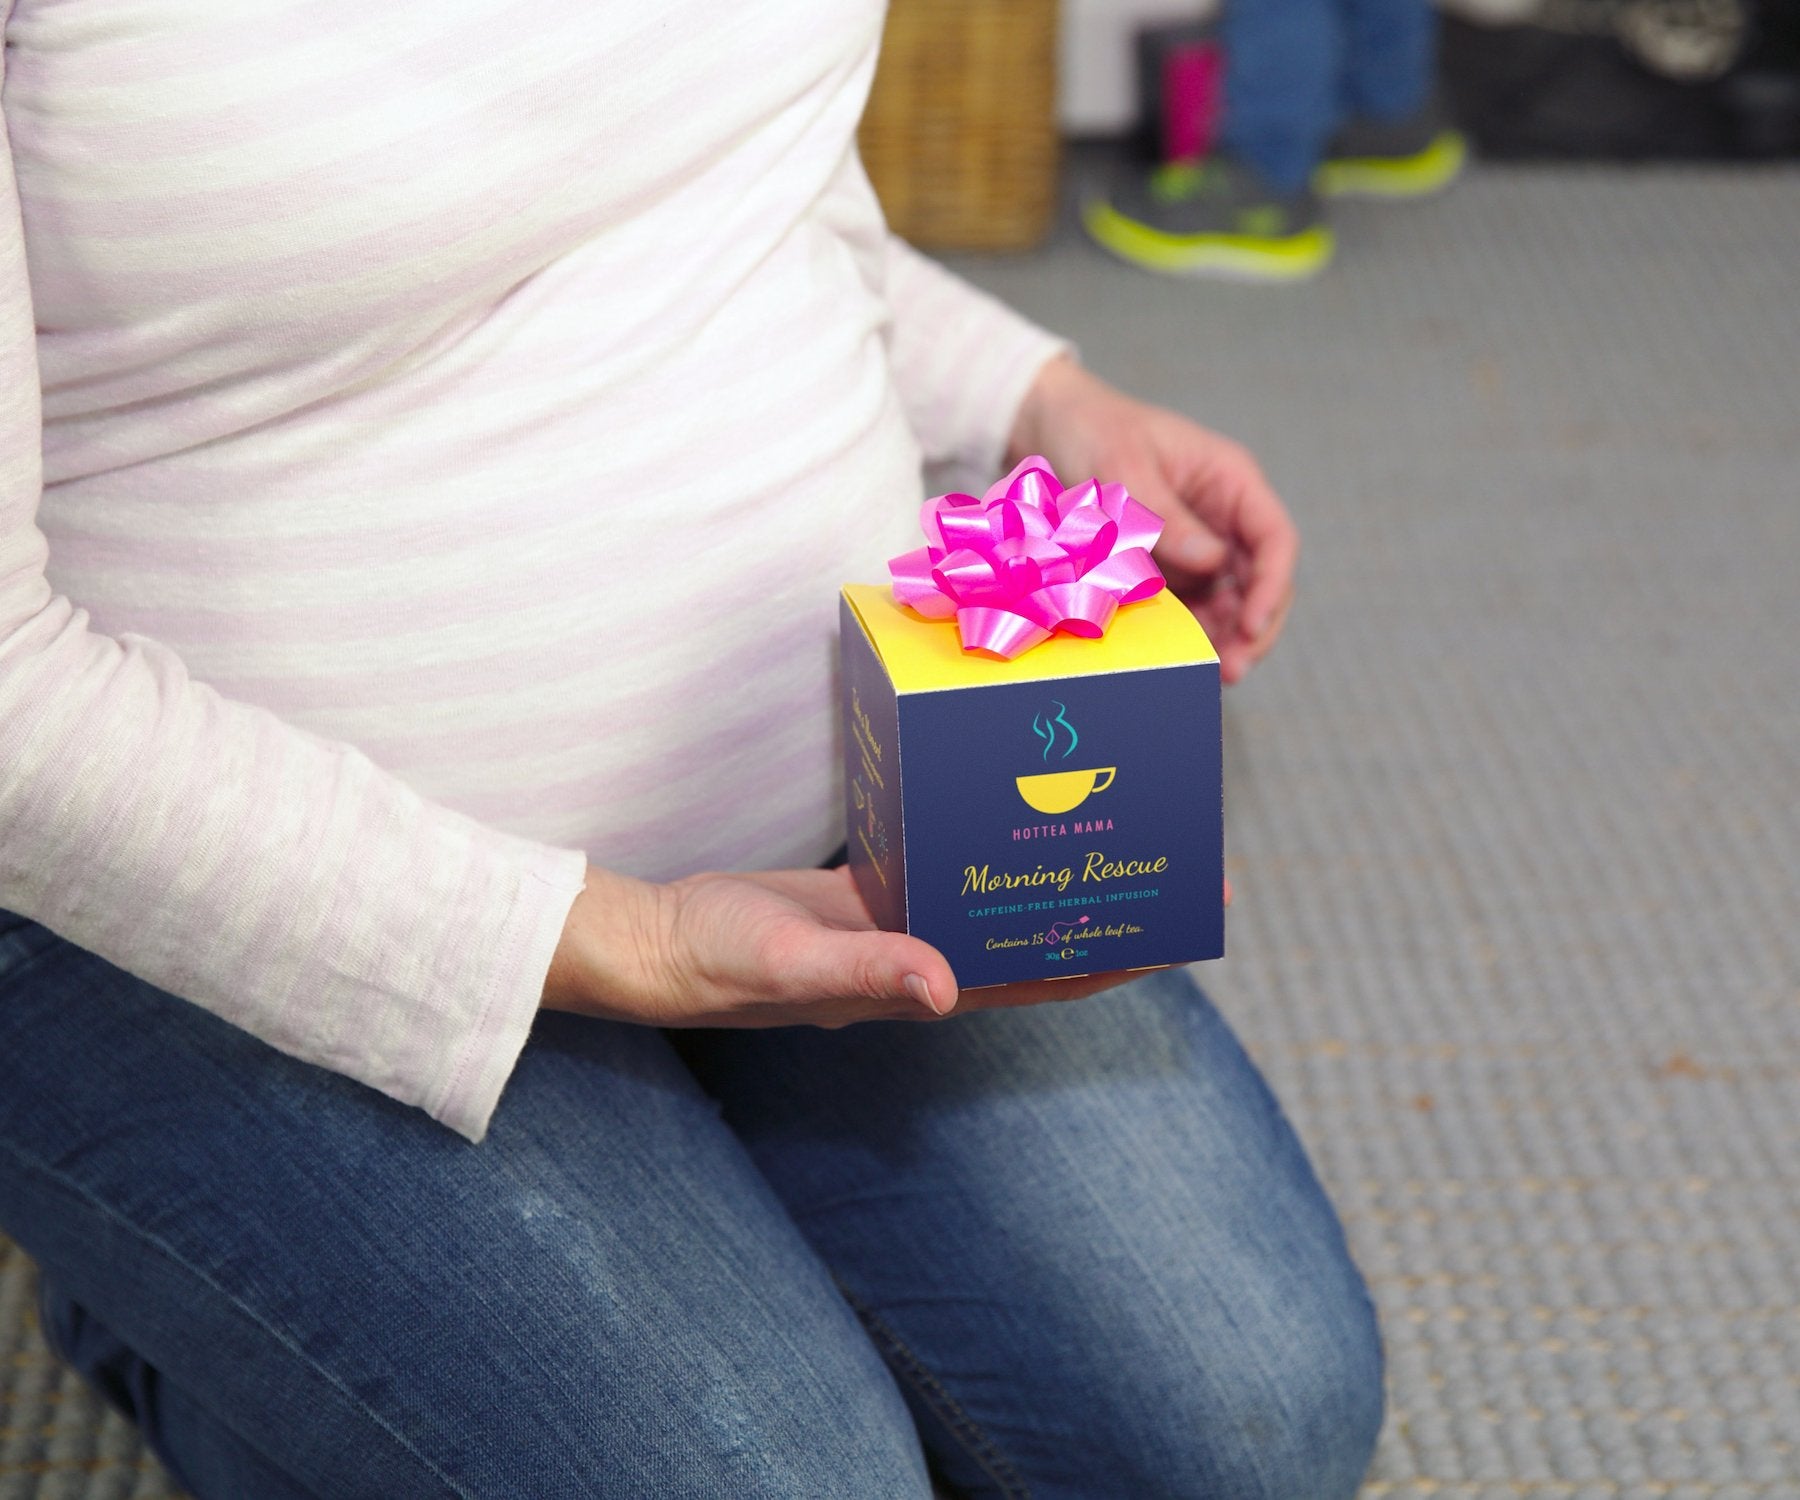 Pregnant lady knelt down, holding a pack of Morning Rescue tea with a pink bow on top